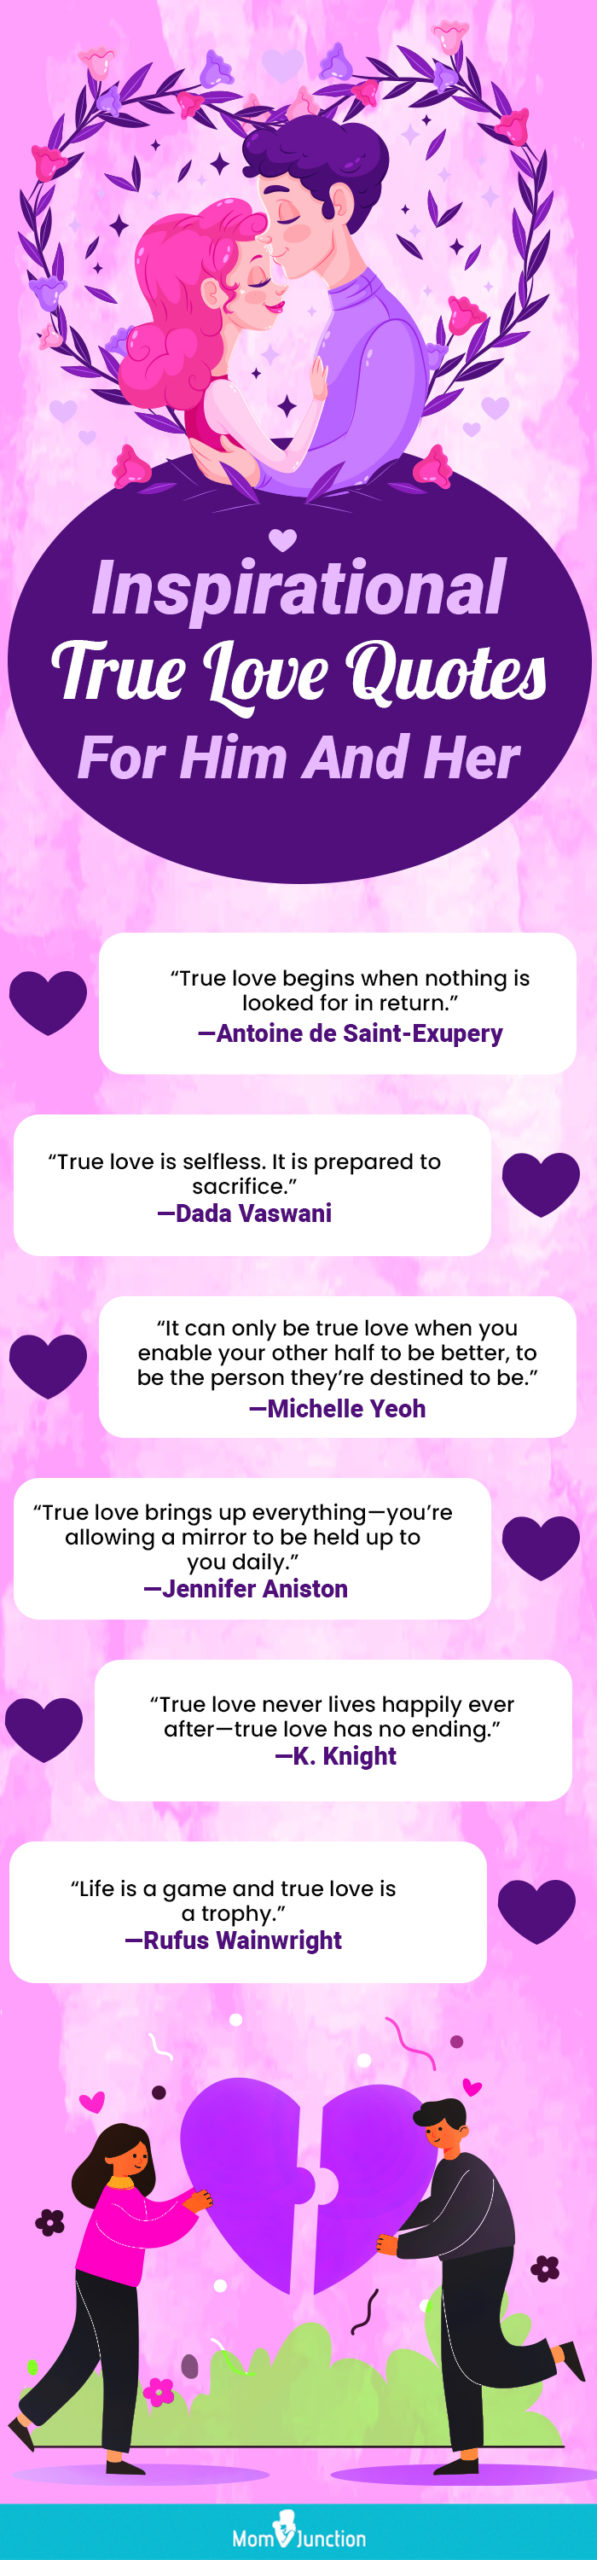 inspirational true love quotes for him and her (infographic)